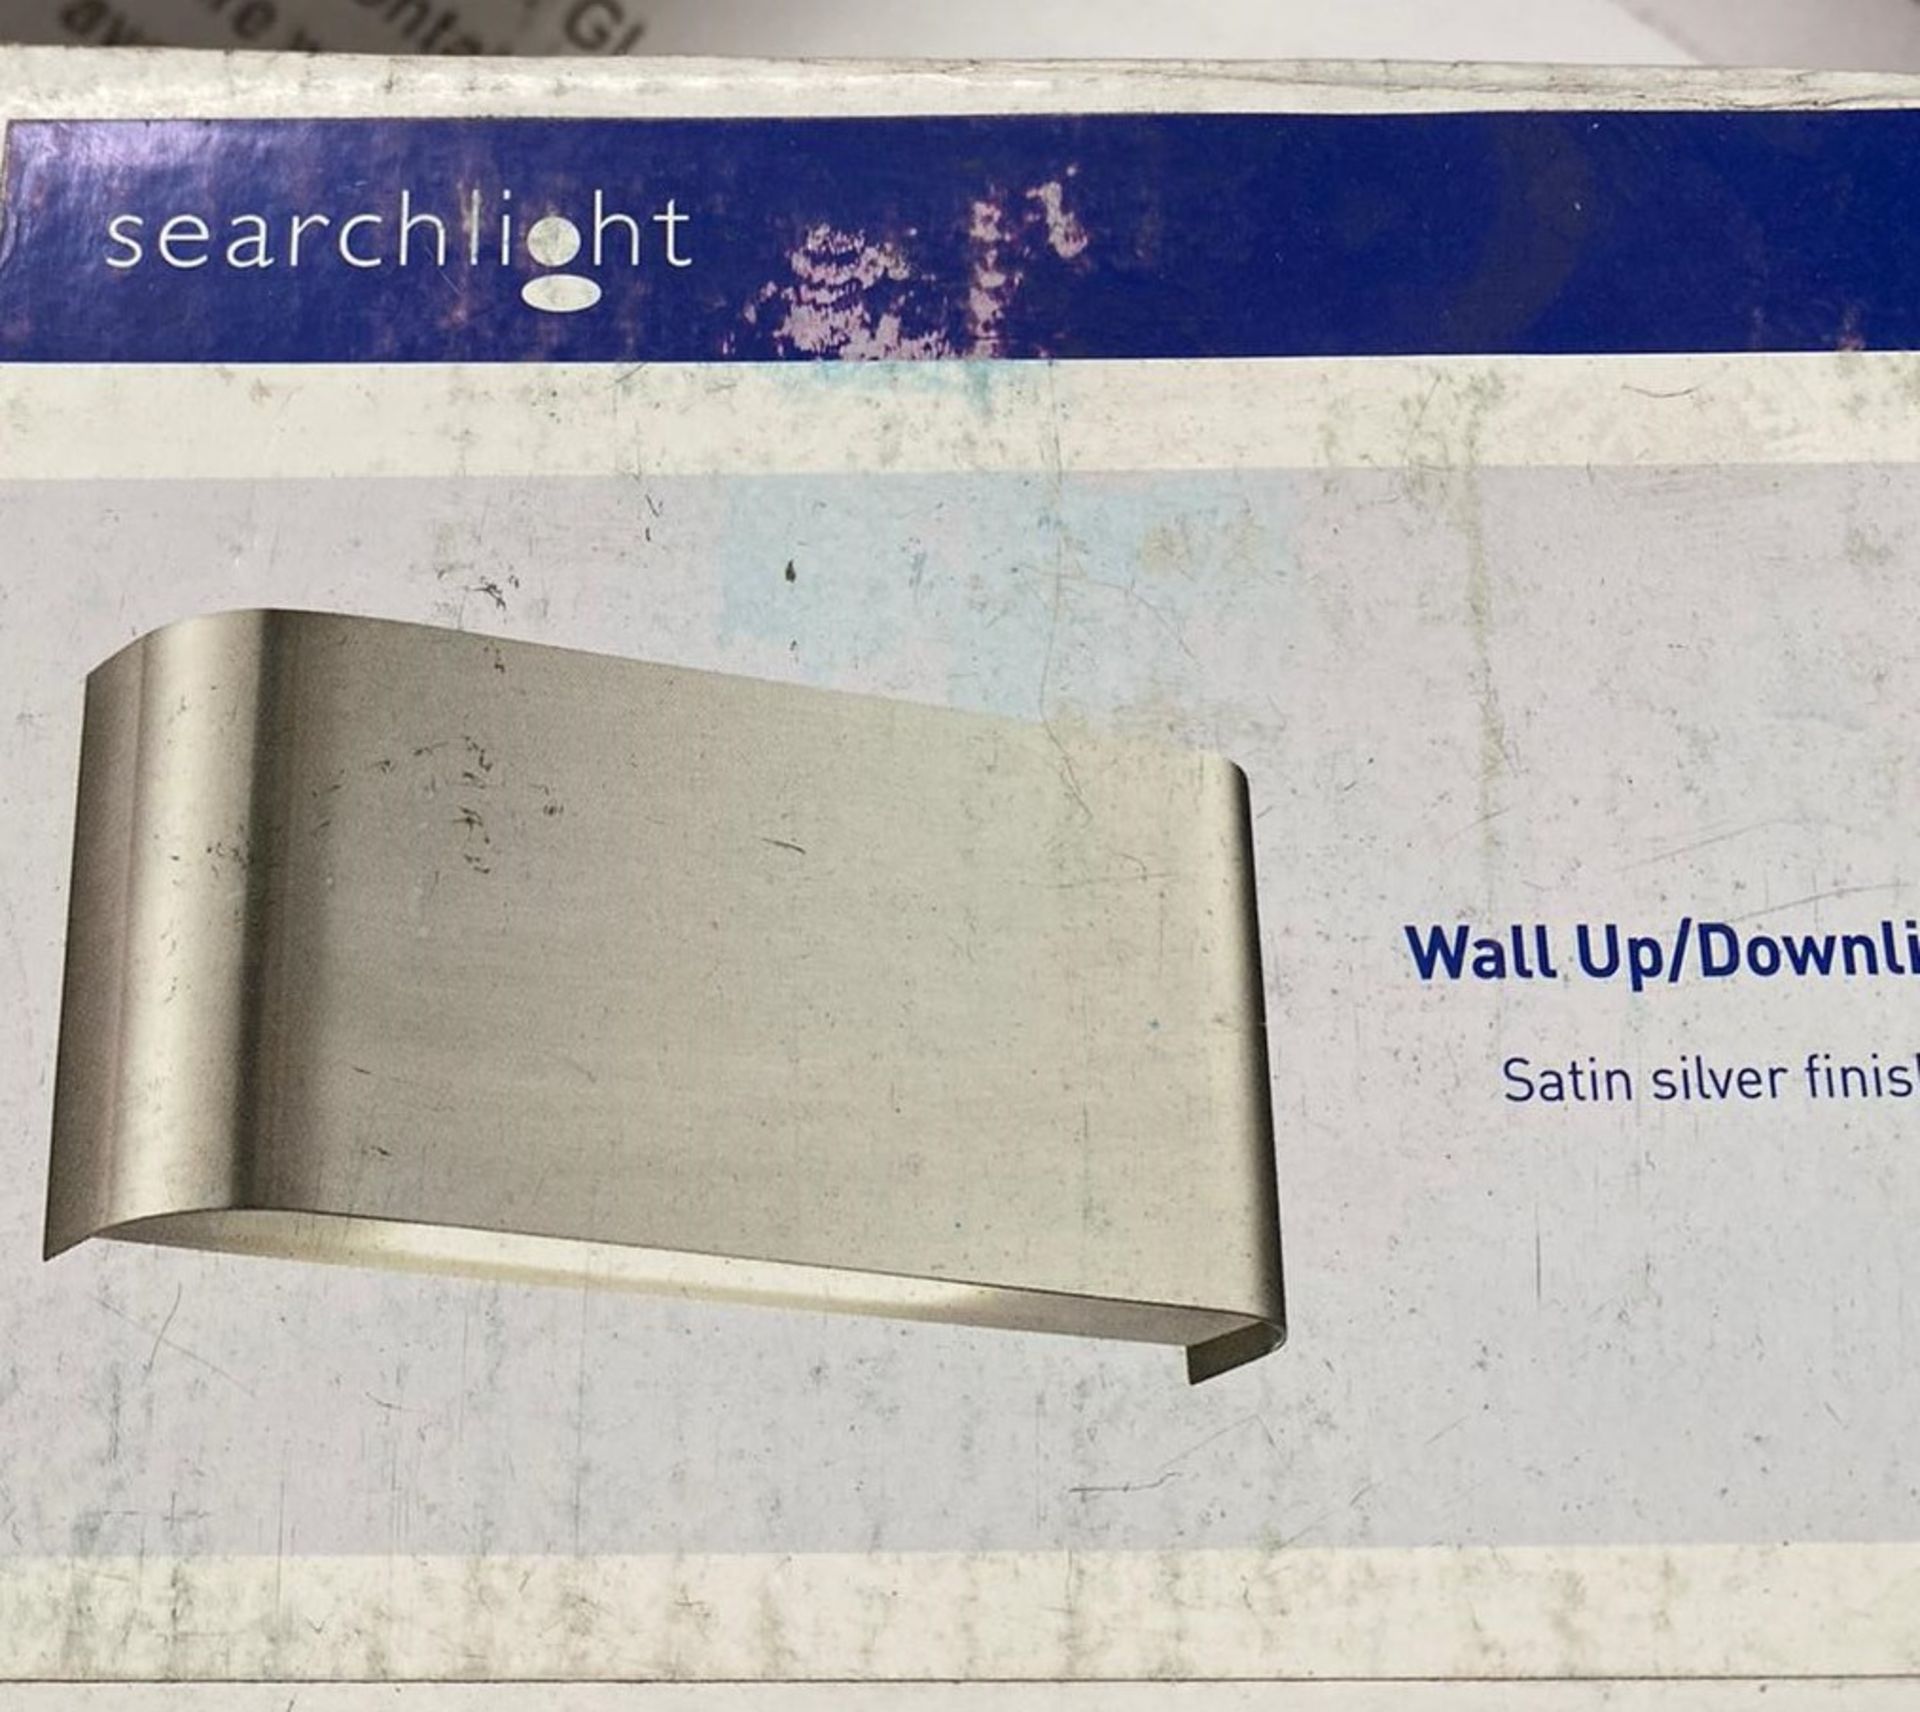 3 x Searchlight Wall Up/downlight in satin silver - Ref: 1953SS - New and Boxed - RRP: £105(each) - Image 2 of 4